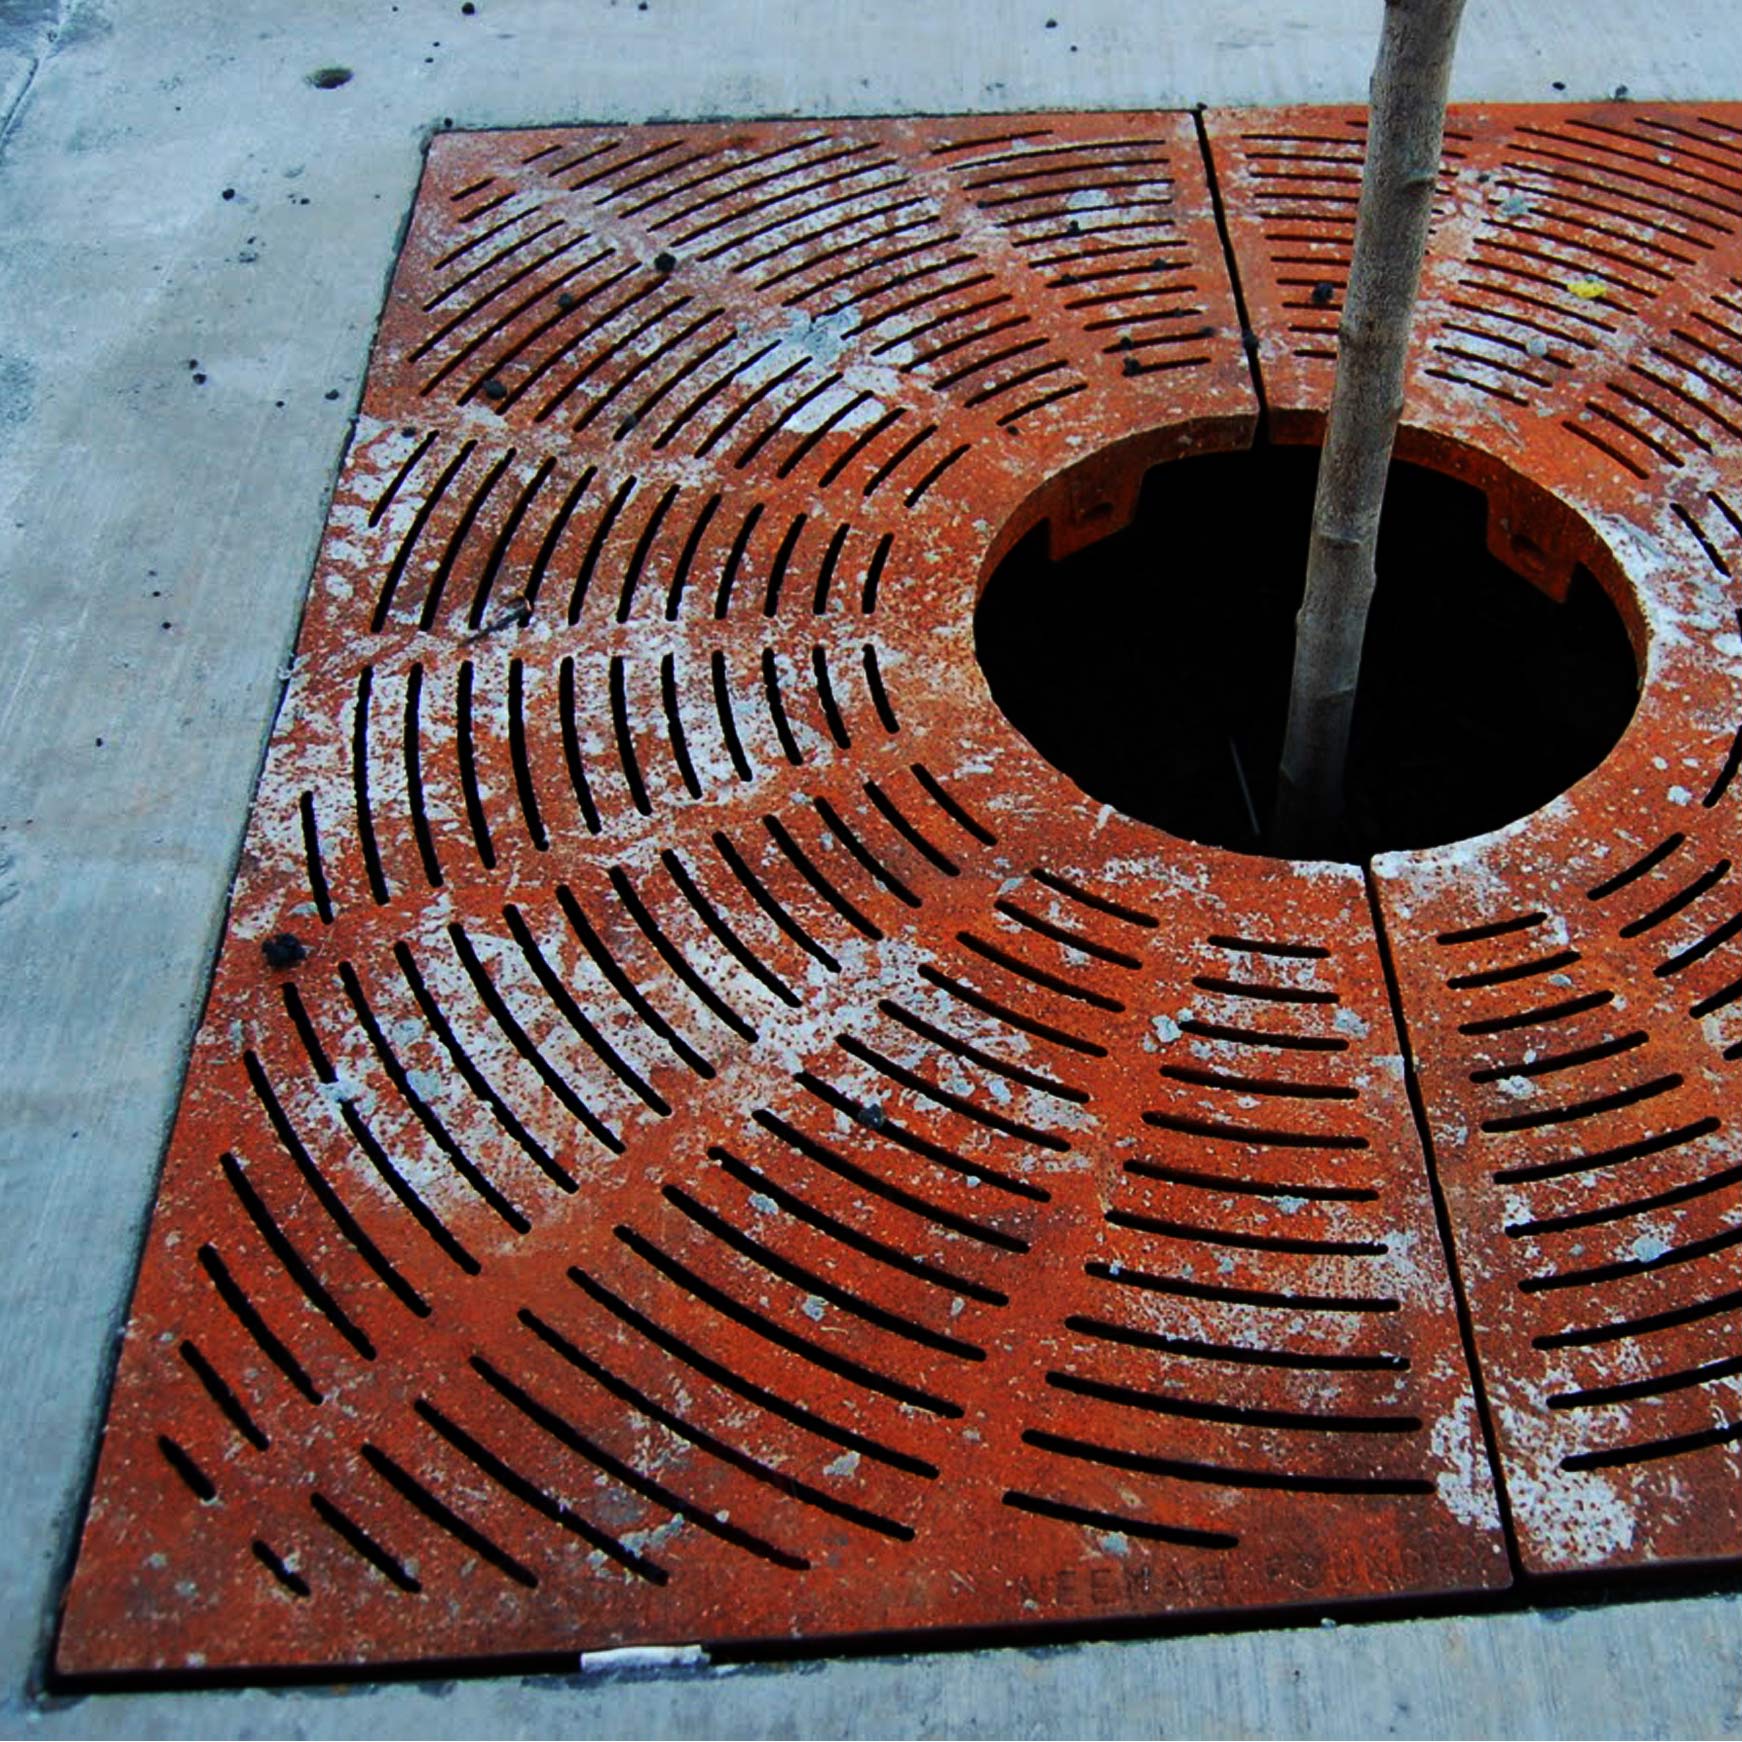 Unsightly Rusted Steel Tree Grate - Try Recycled Plastic Instead